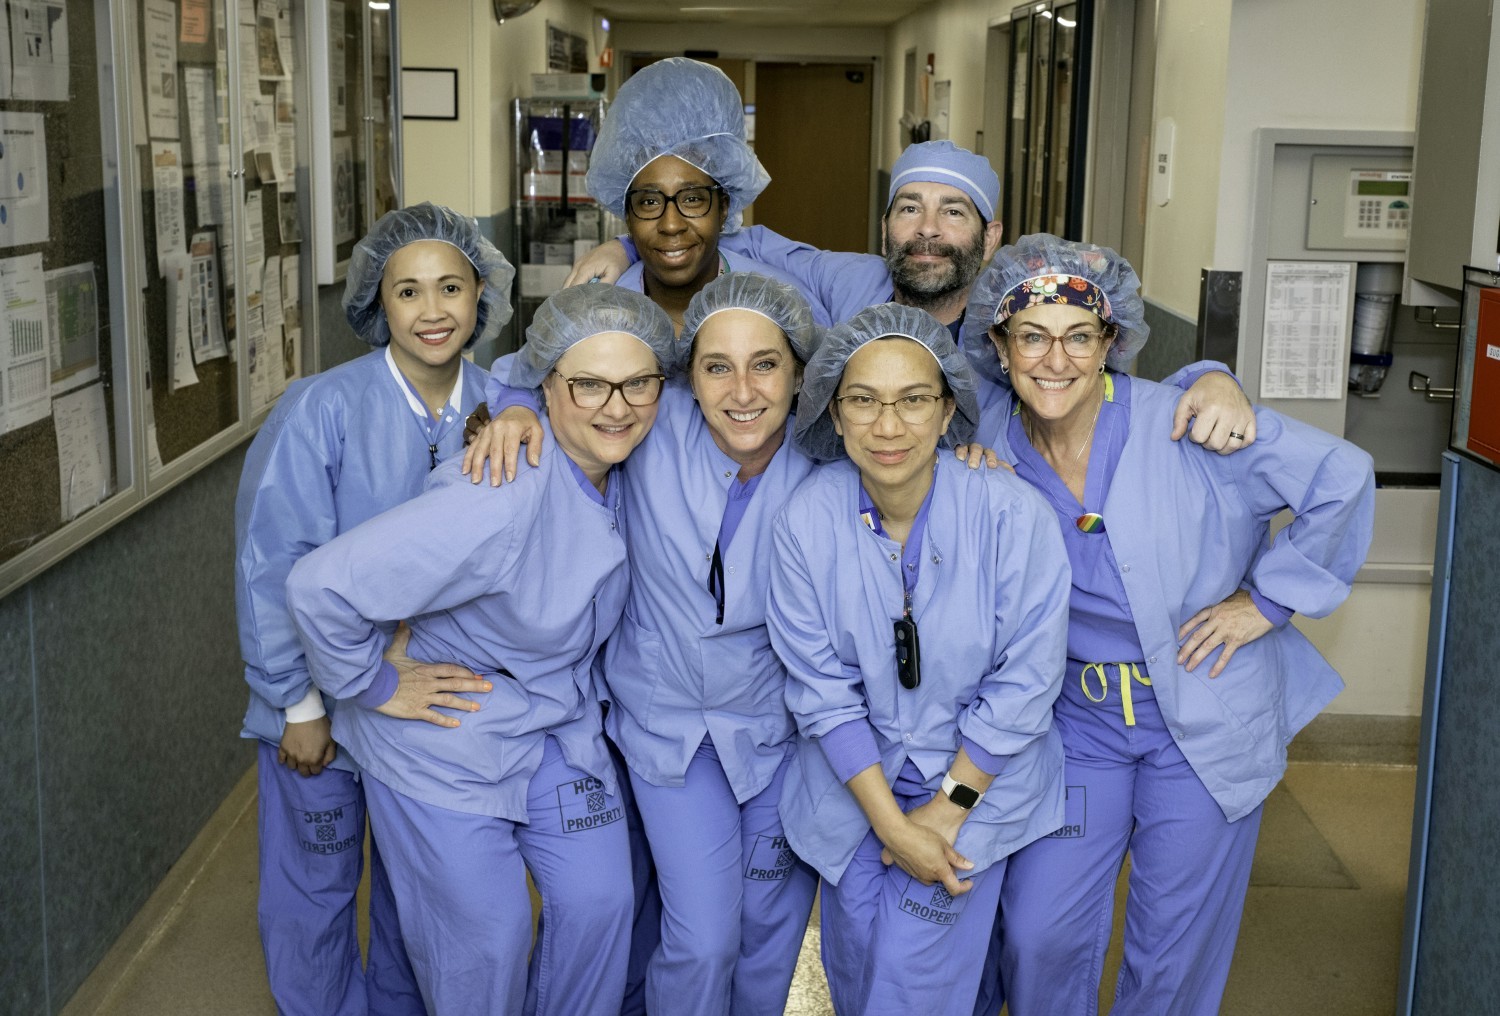 Operating Room team members from Morristown Medical Center